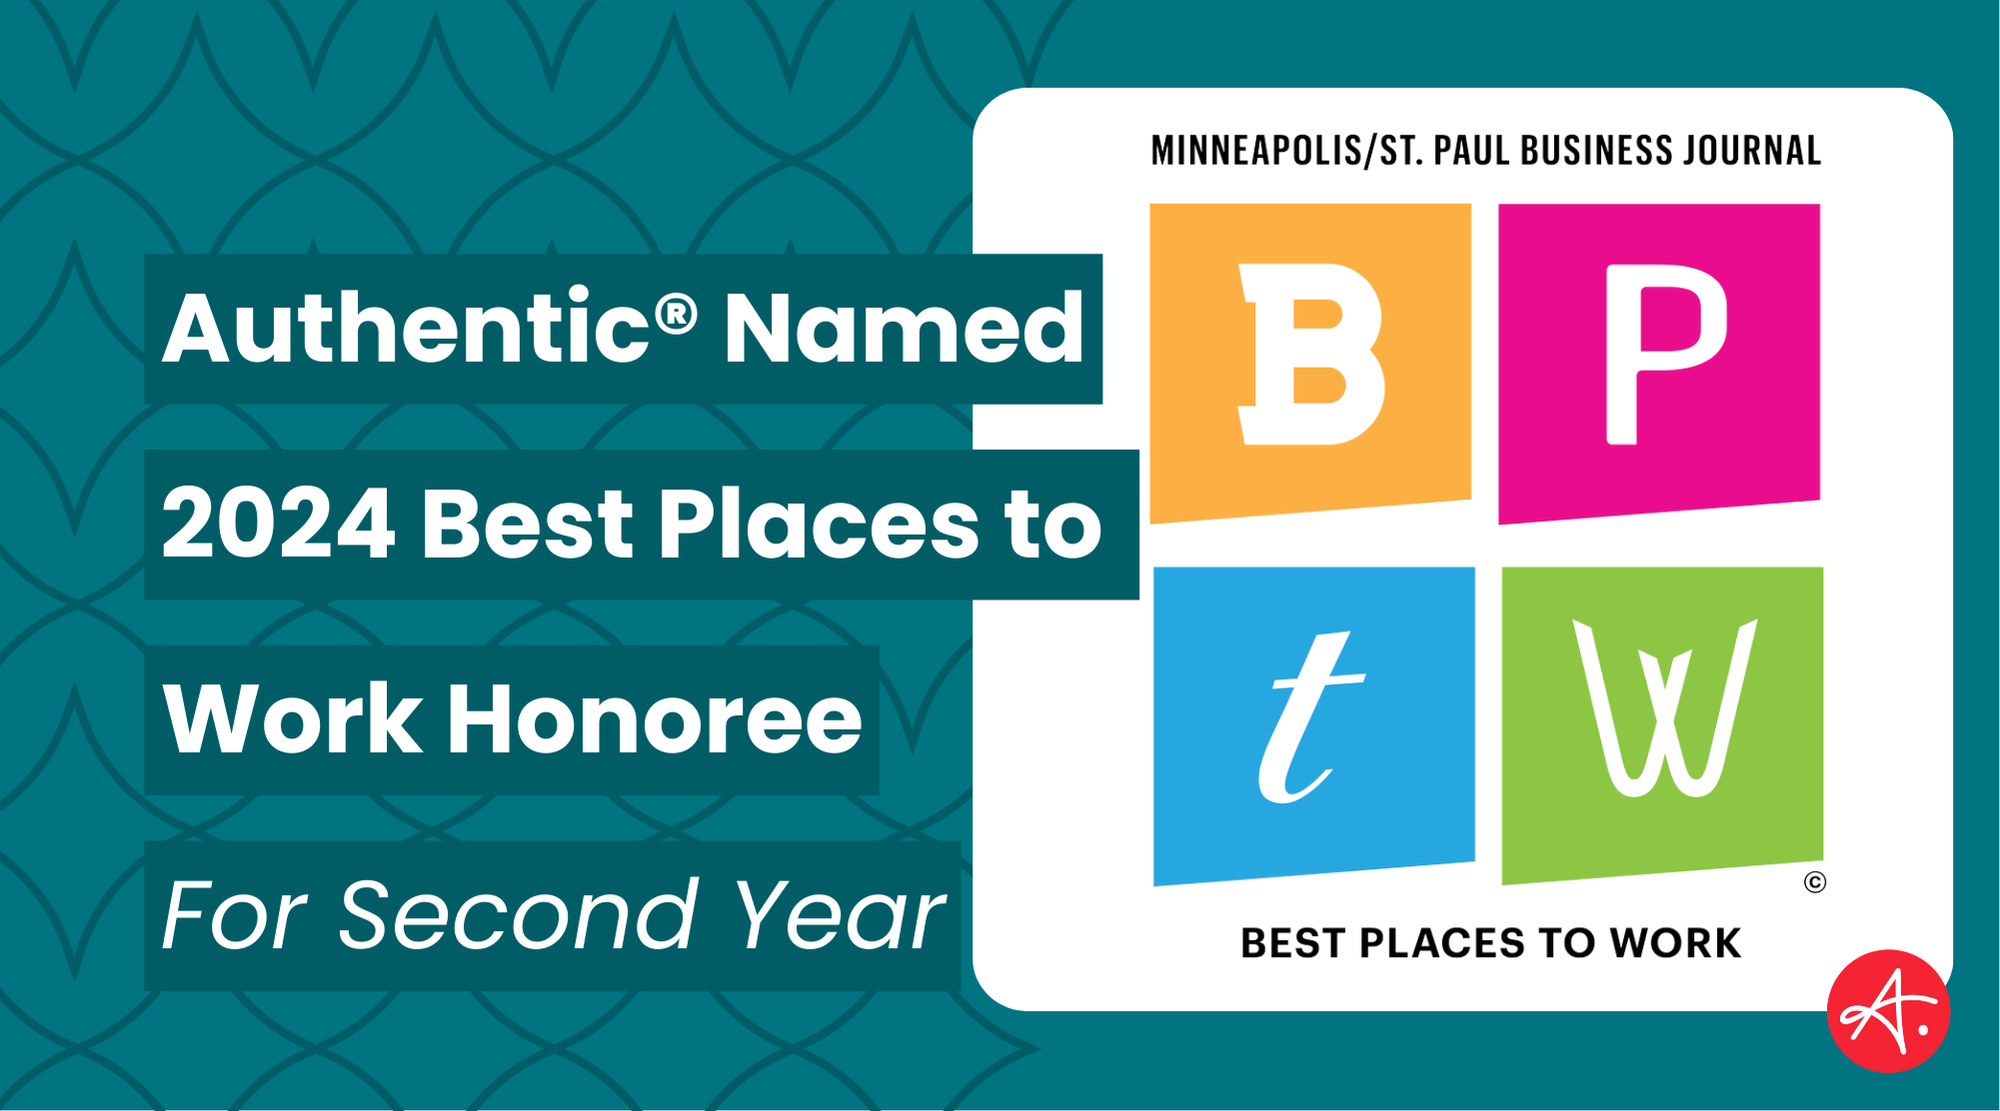 Authentic® Named a 2024 Best Places to Work Honoree For Second Year